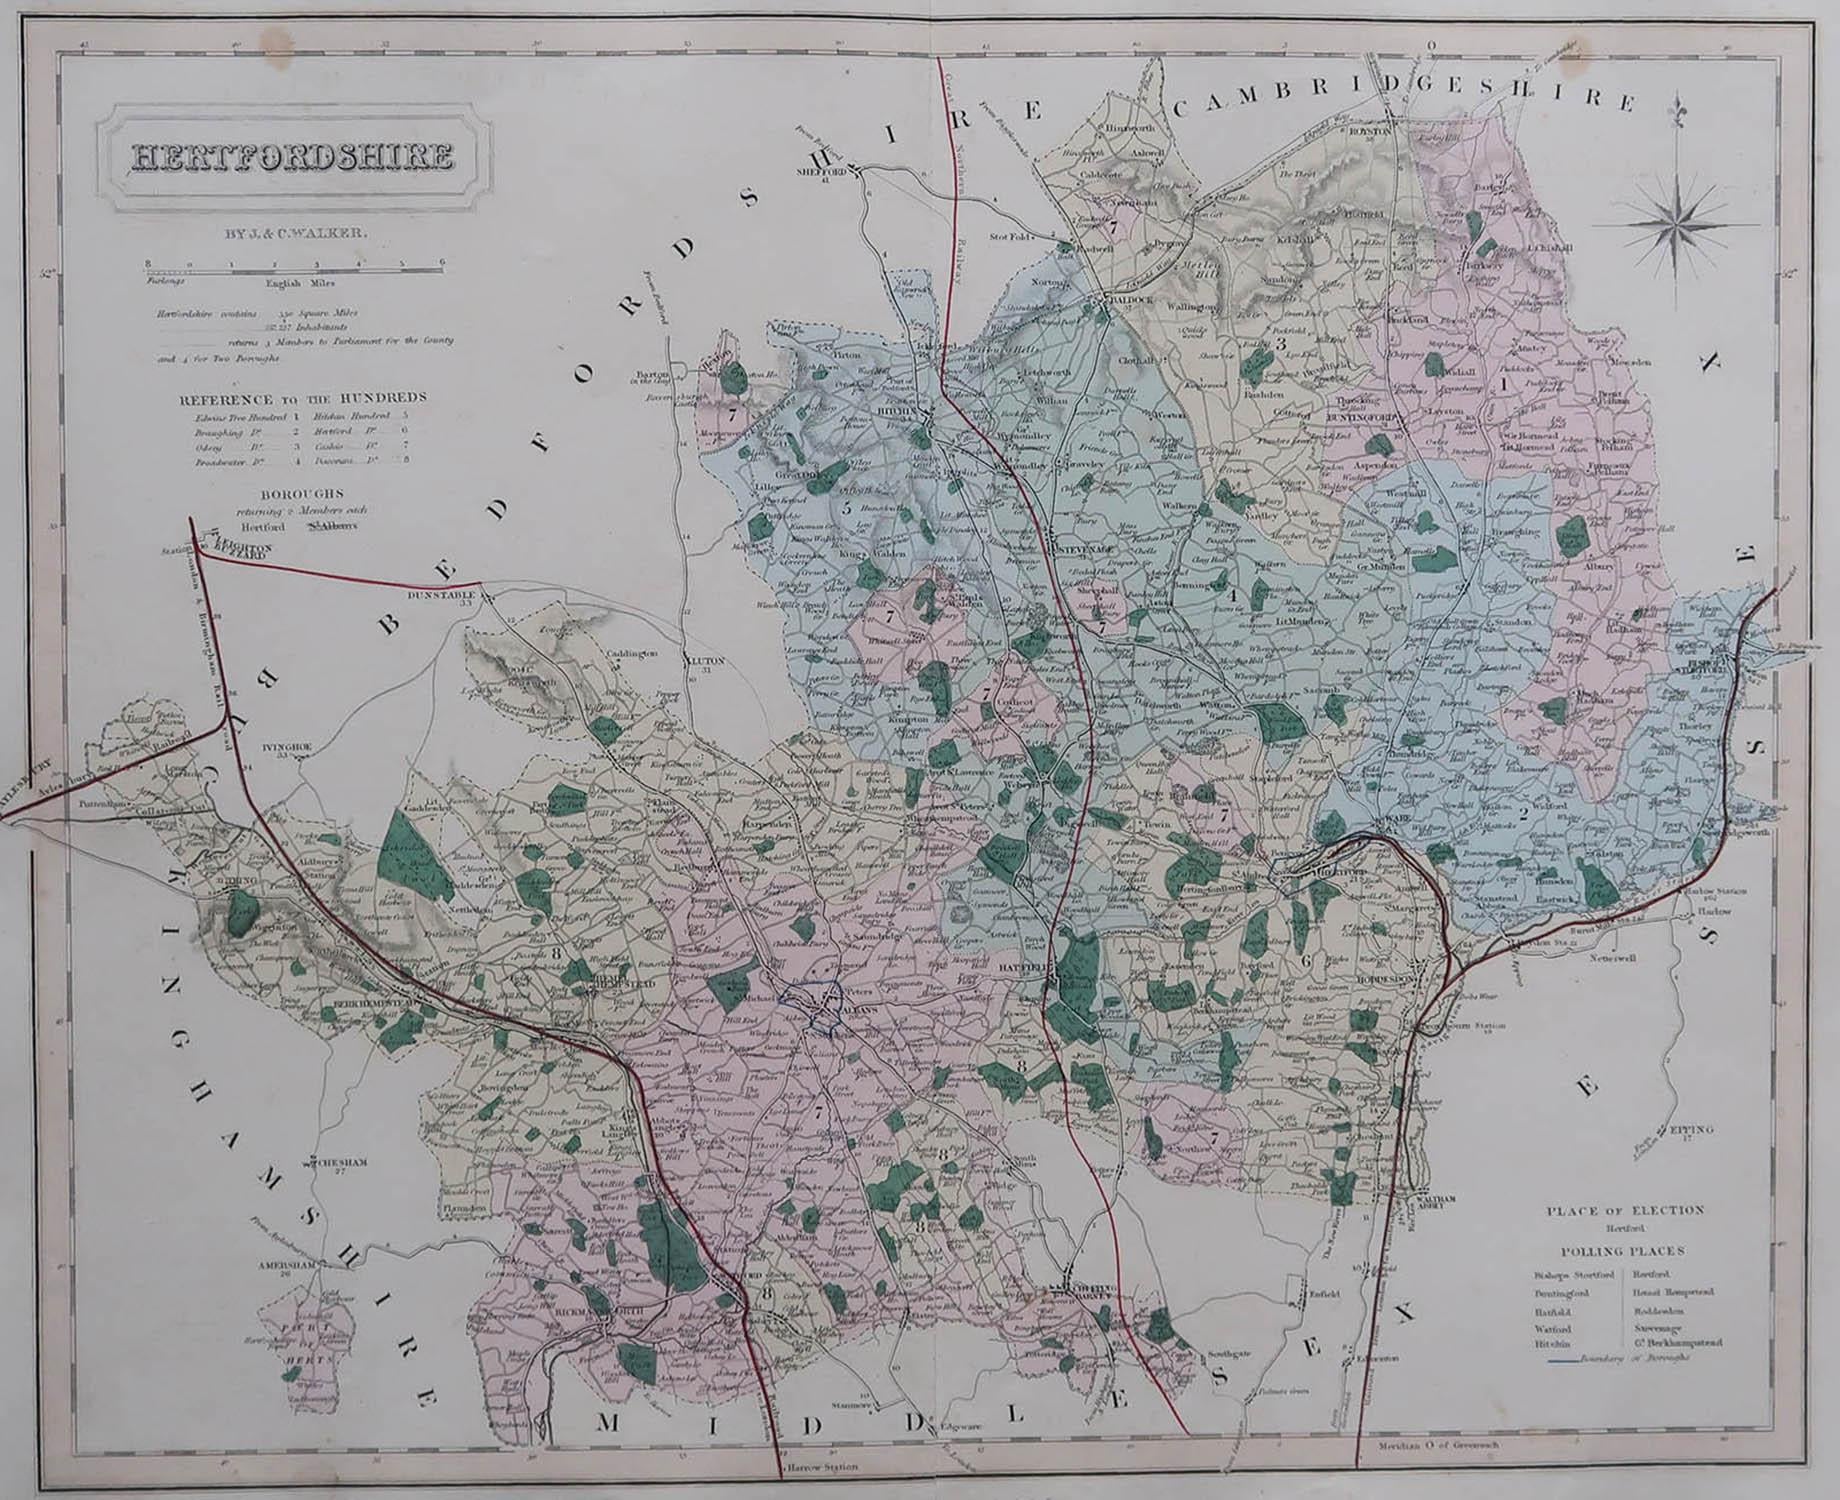 Great map of Hertfordshire

Original colour

By J & C Walker

Published by Longman, Rees, Orme, Brown & Co. 1851

Unframed.




